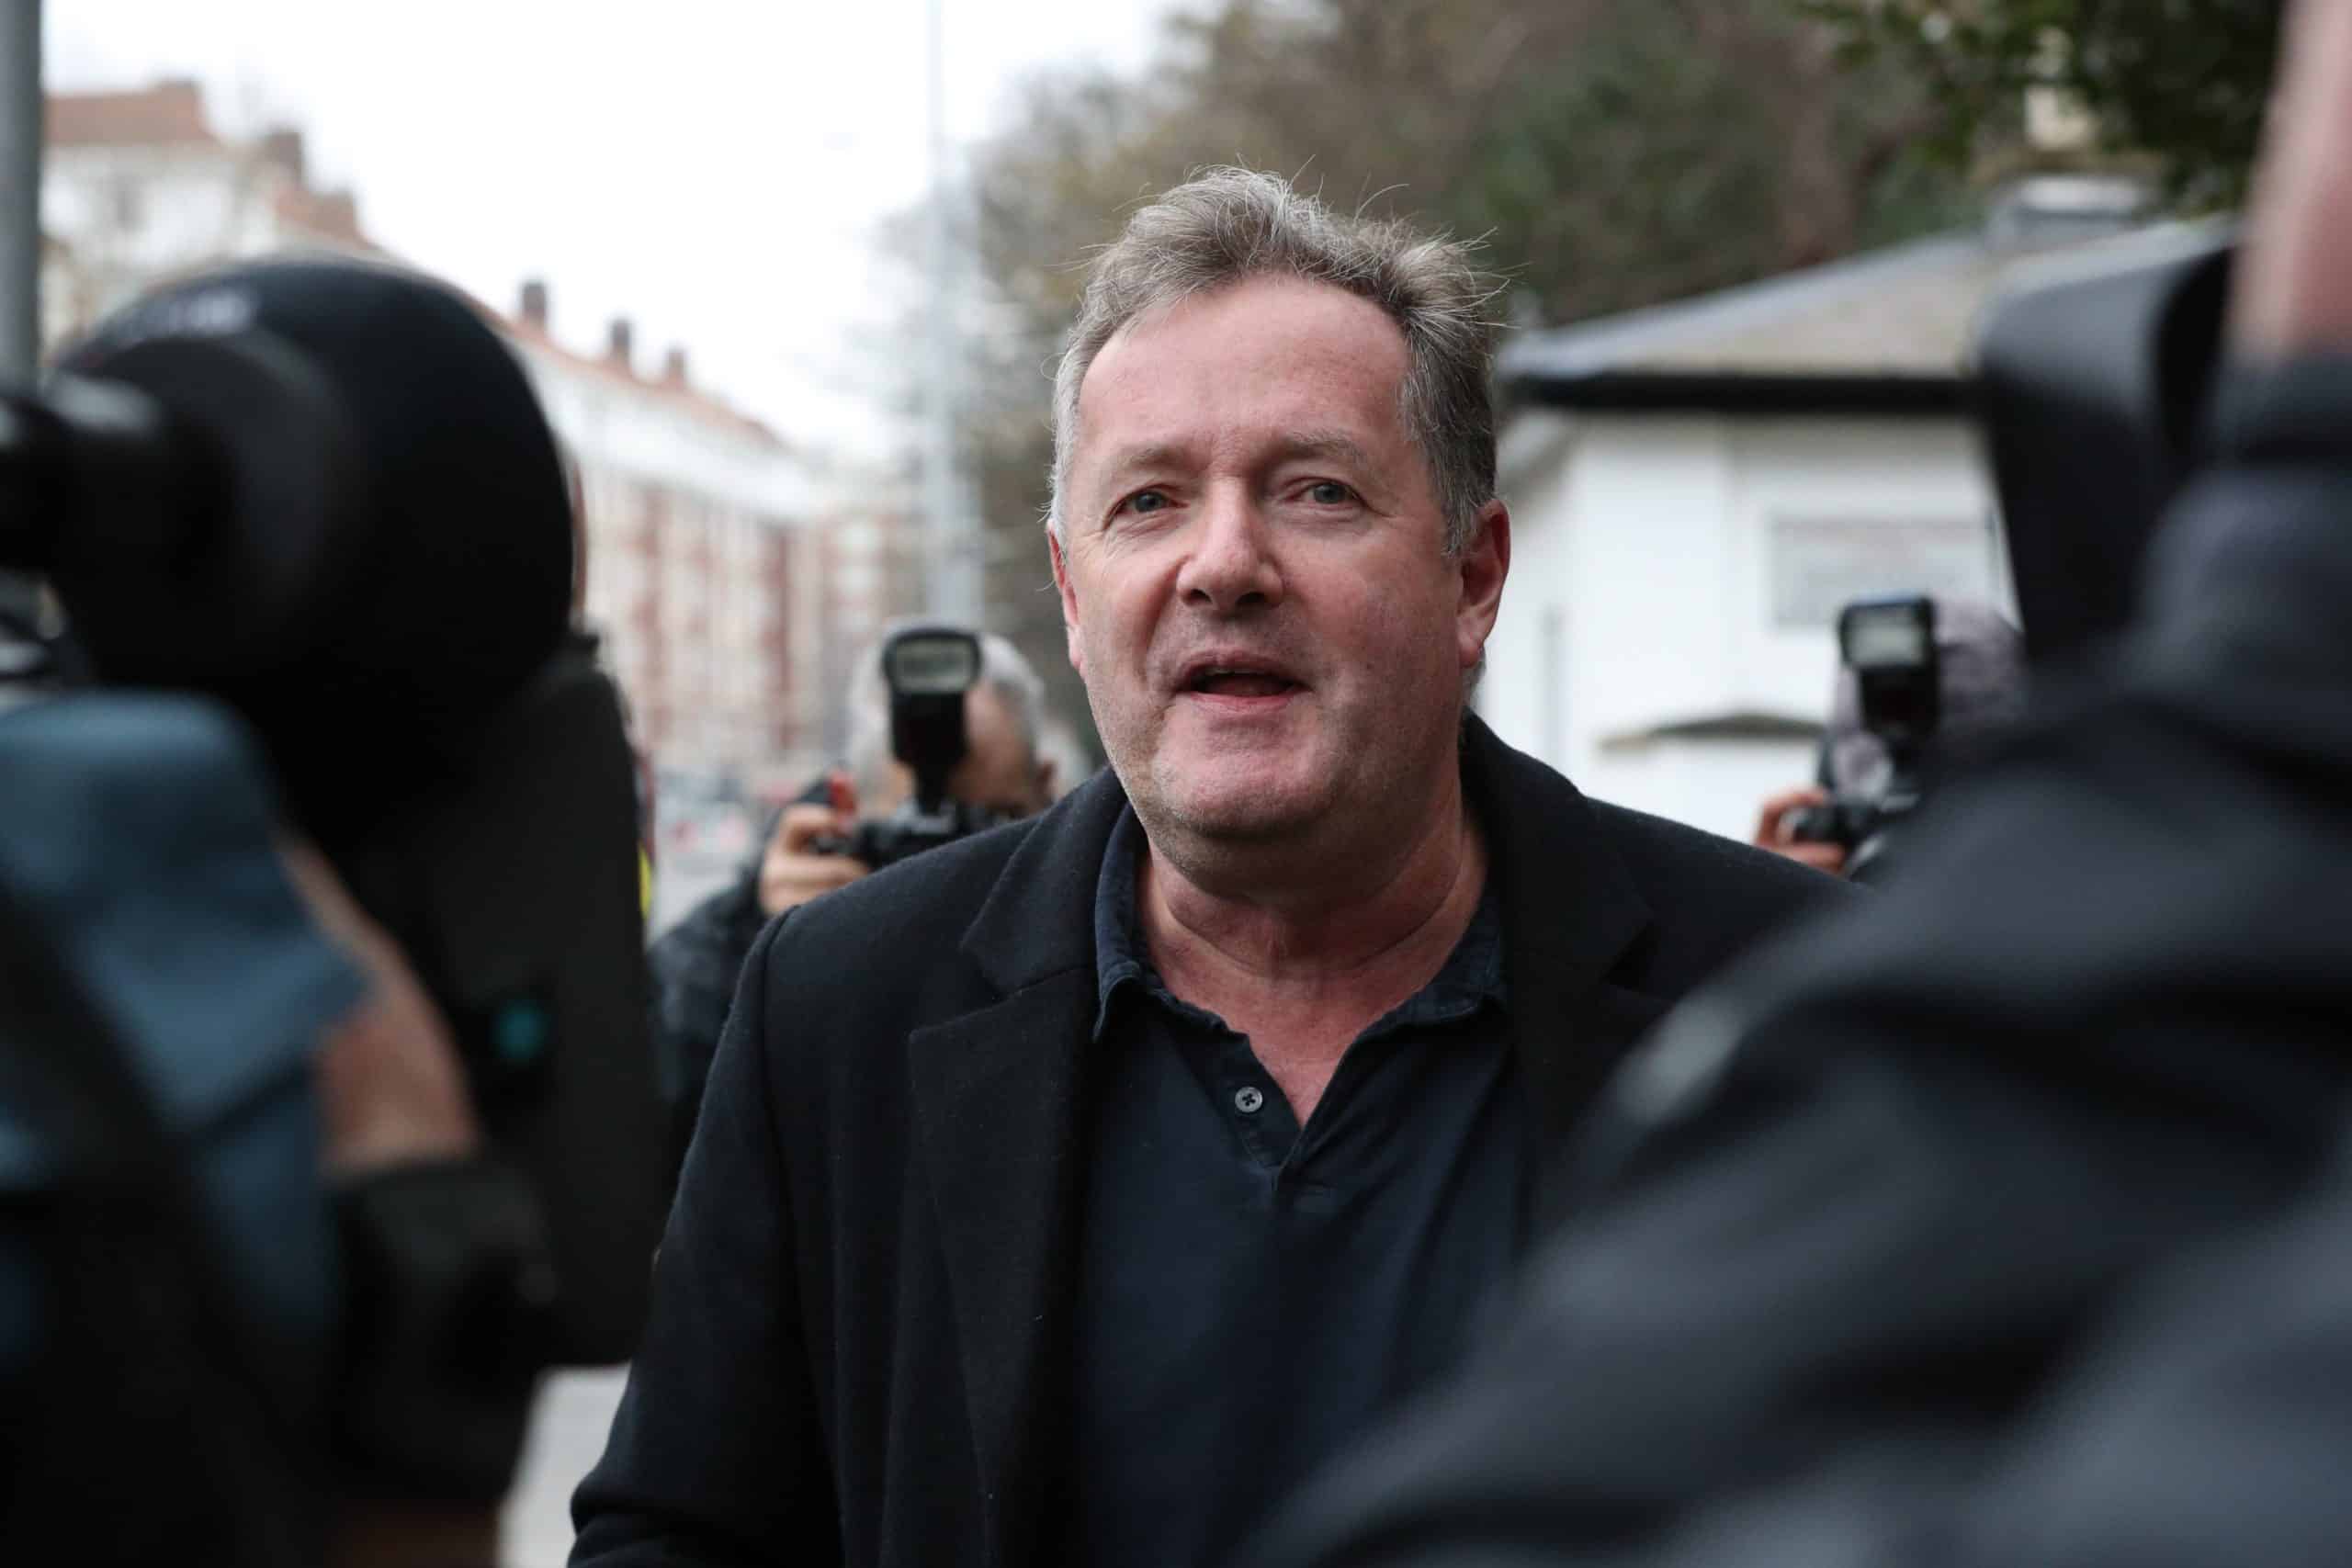 Piers Morgan troll arrested as TV star warns ‘threats have consequences’